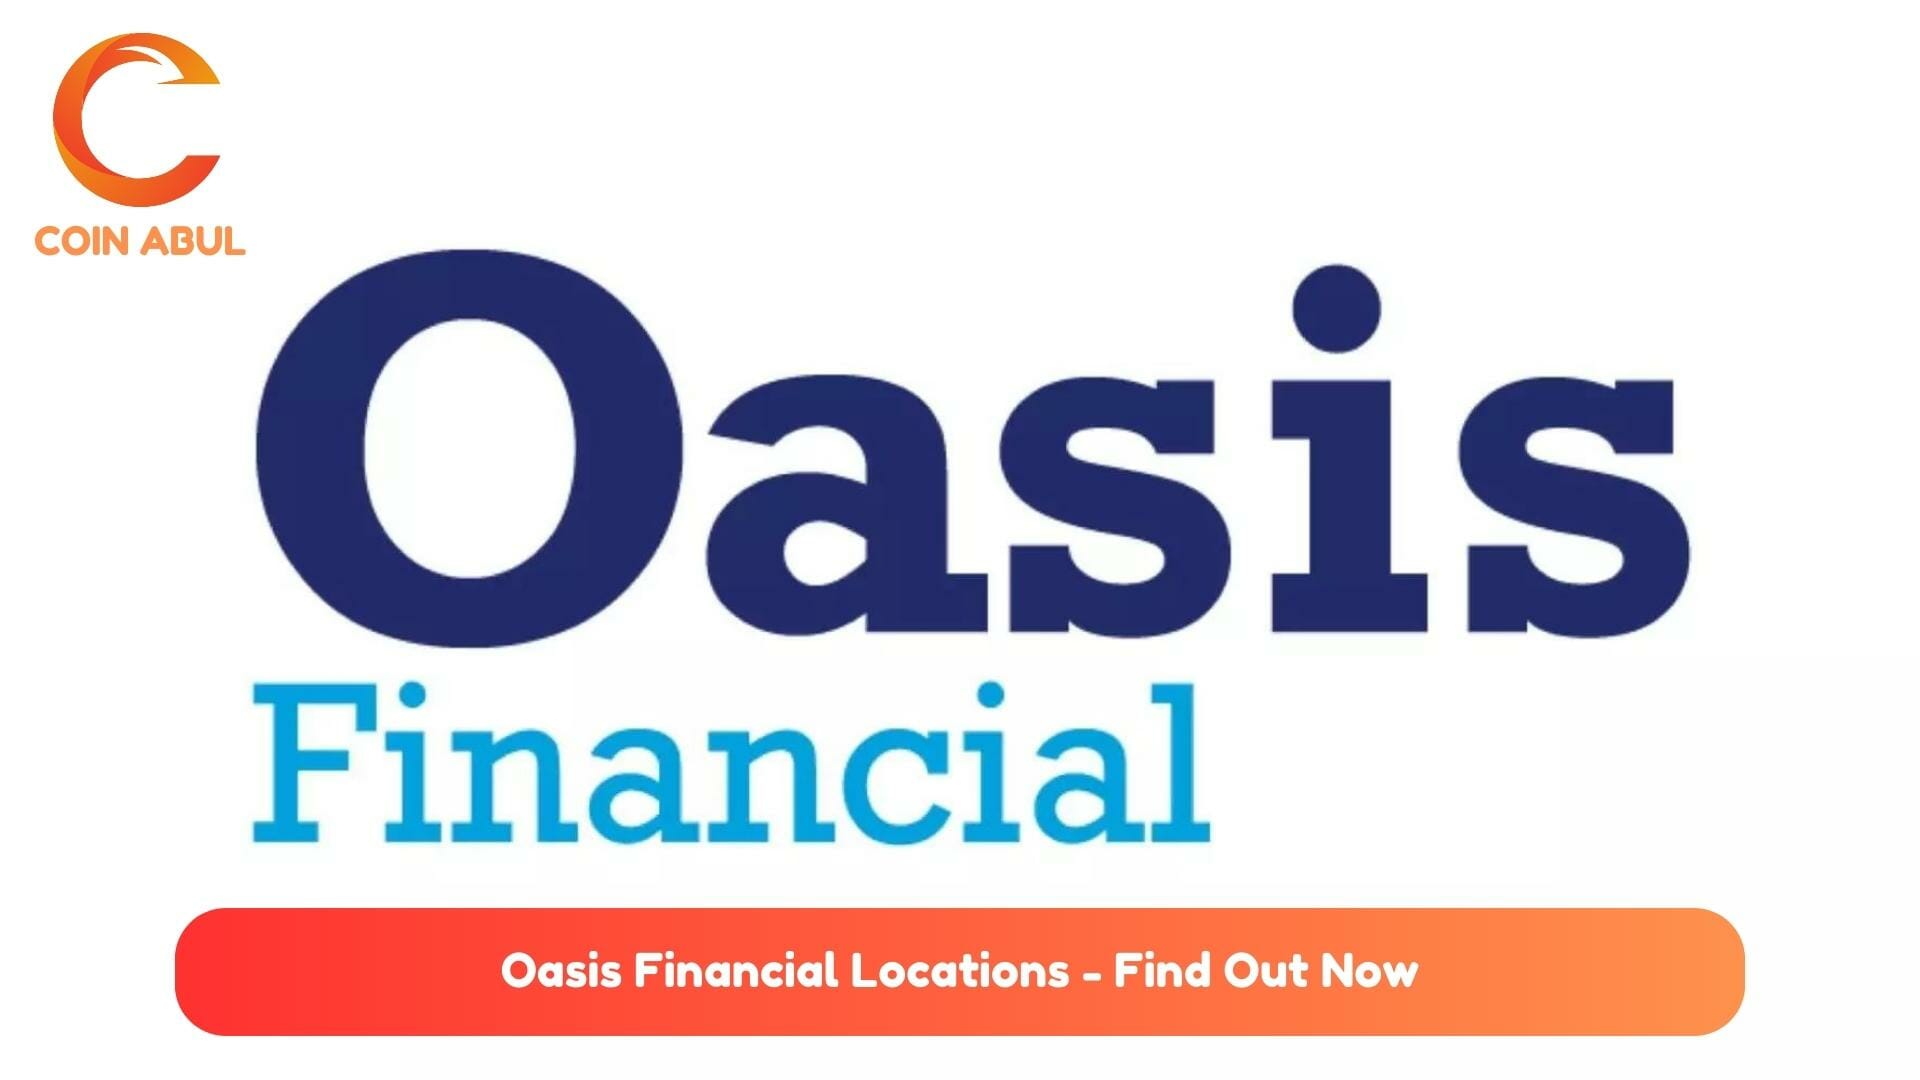 Oasis Financial Locations